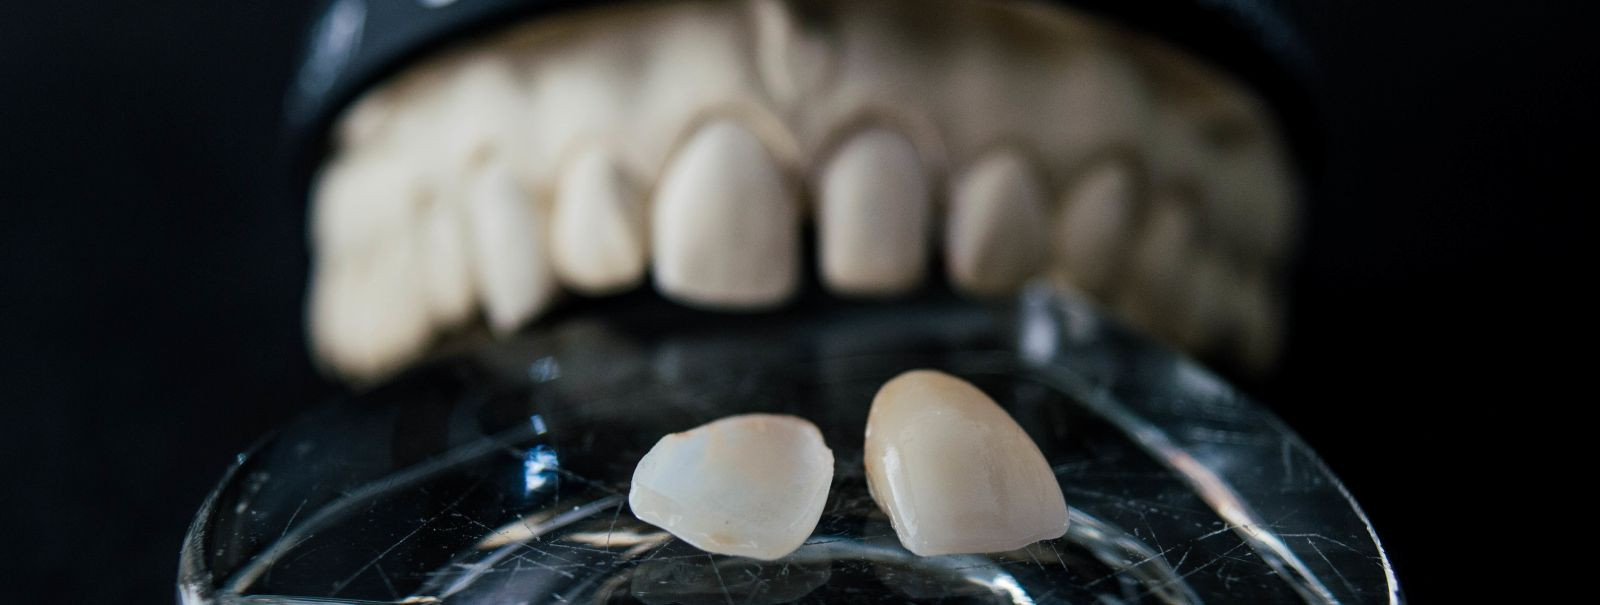 Dental prostheses are artificial devices designed to replace missing teeth, restore oral functions, and enhance aesthetic appearance. They play a crucial role i